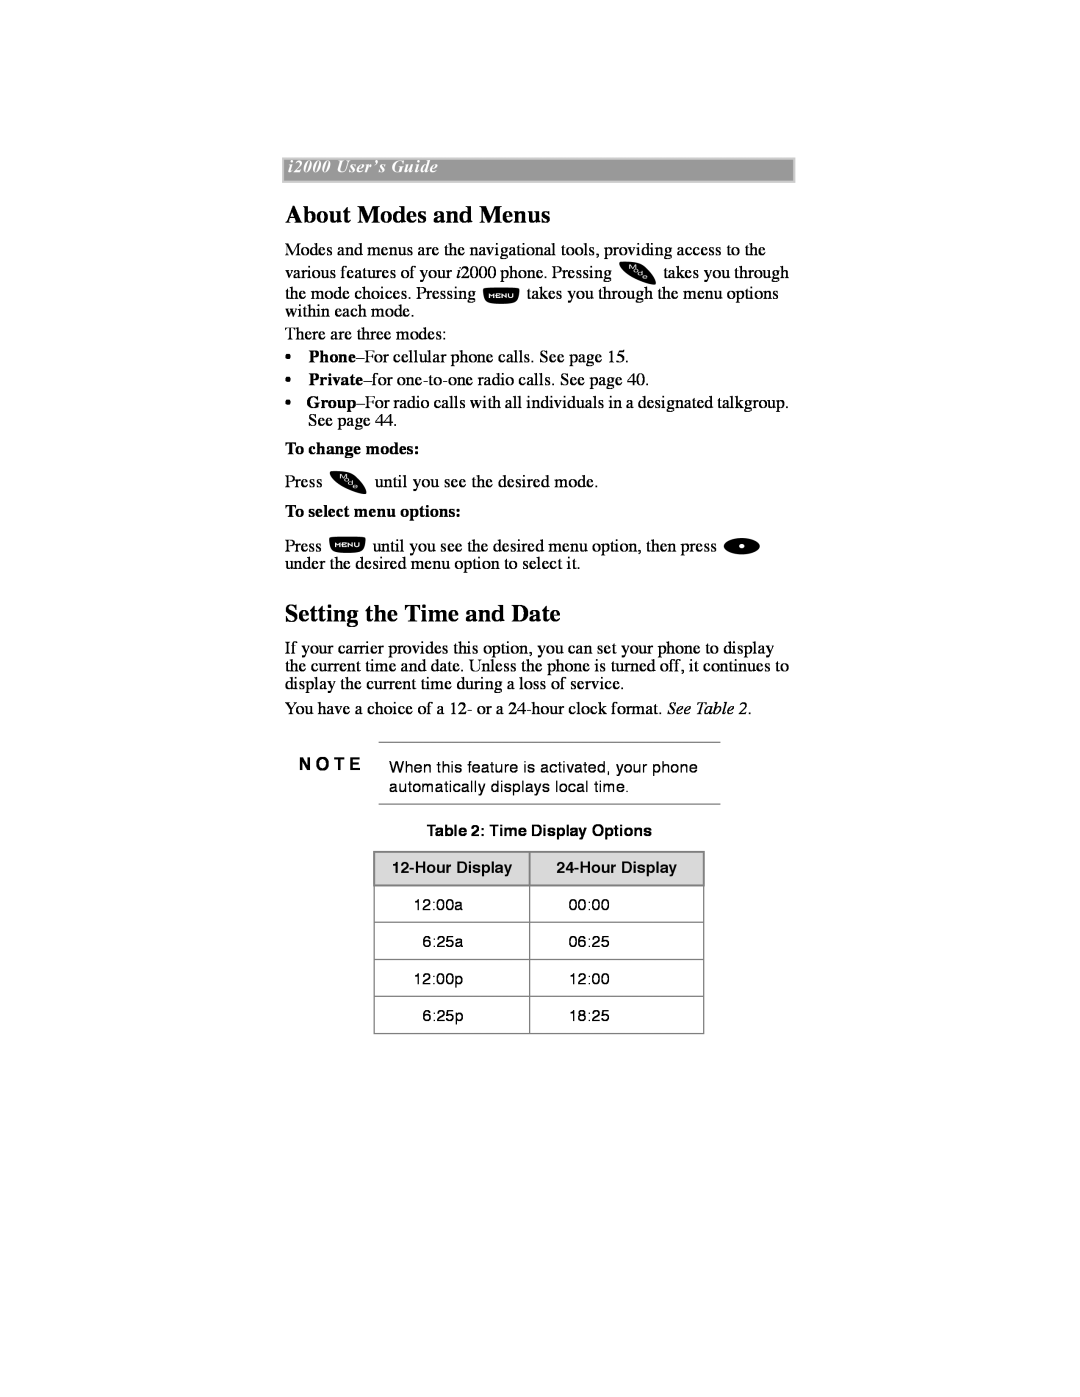 Motorola iDEN manual About Modes and Menus, Setting the Time and Date, To change modes, To select menu options 